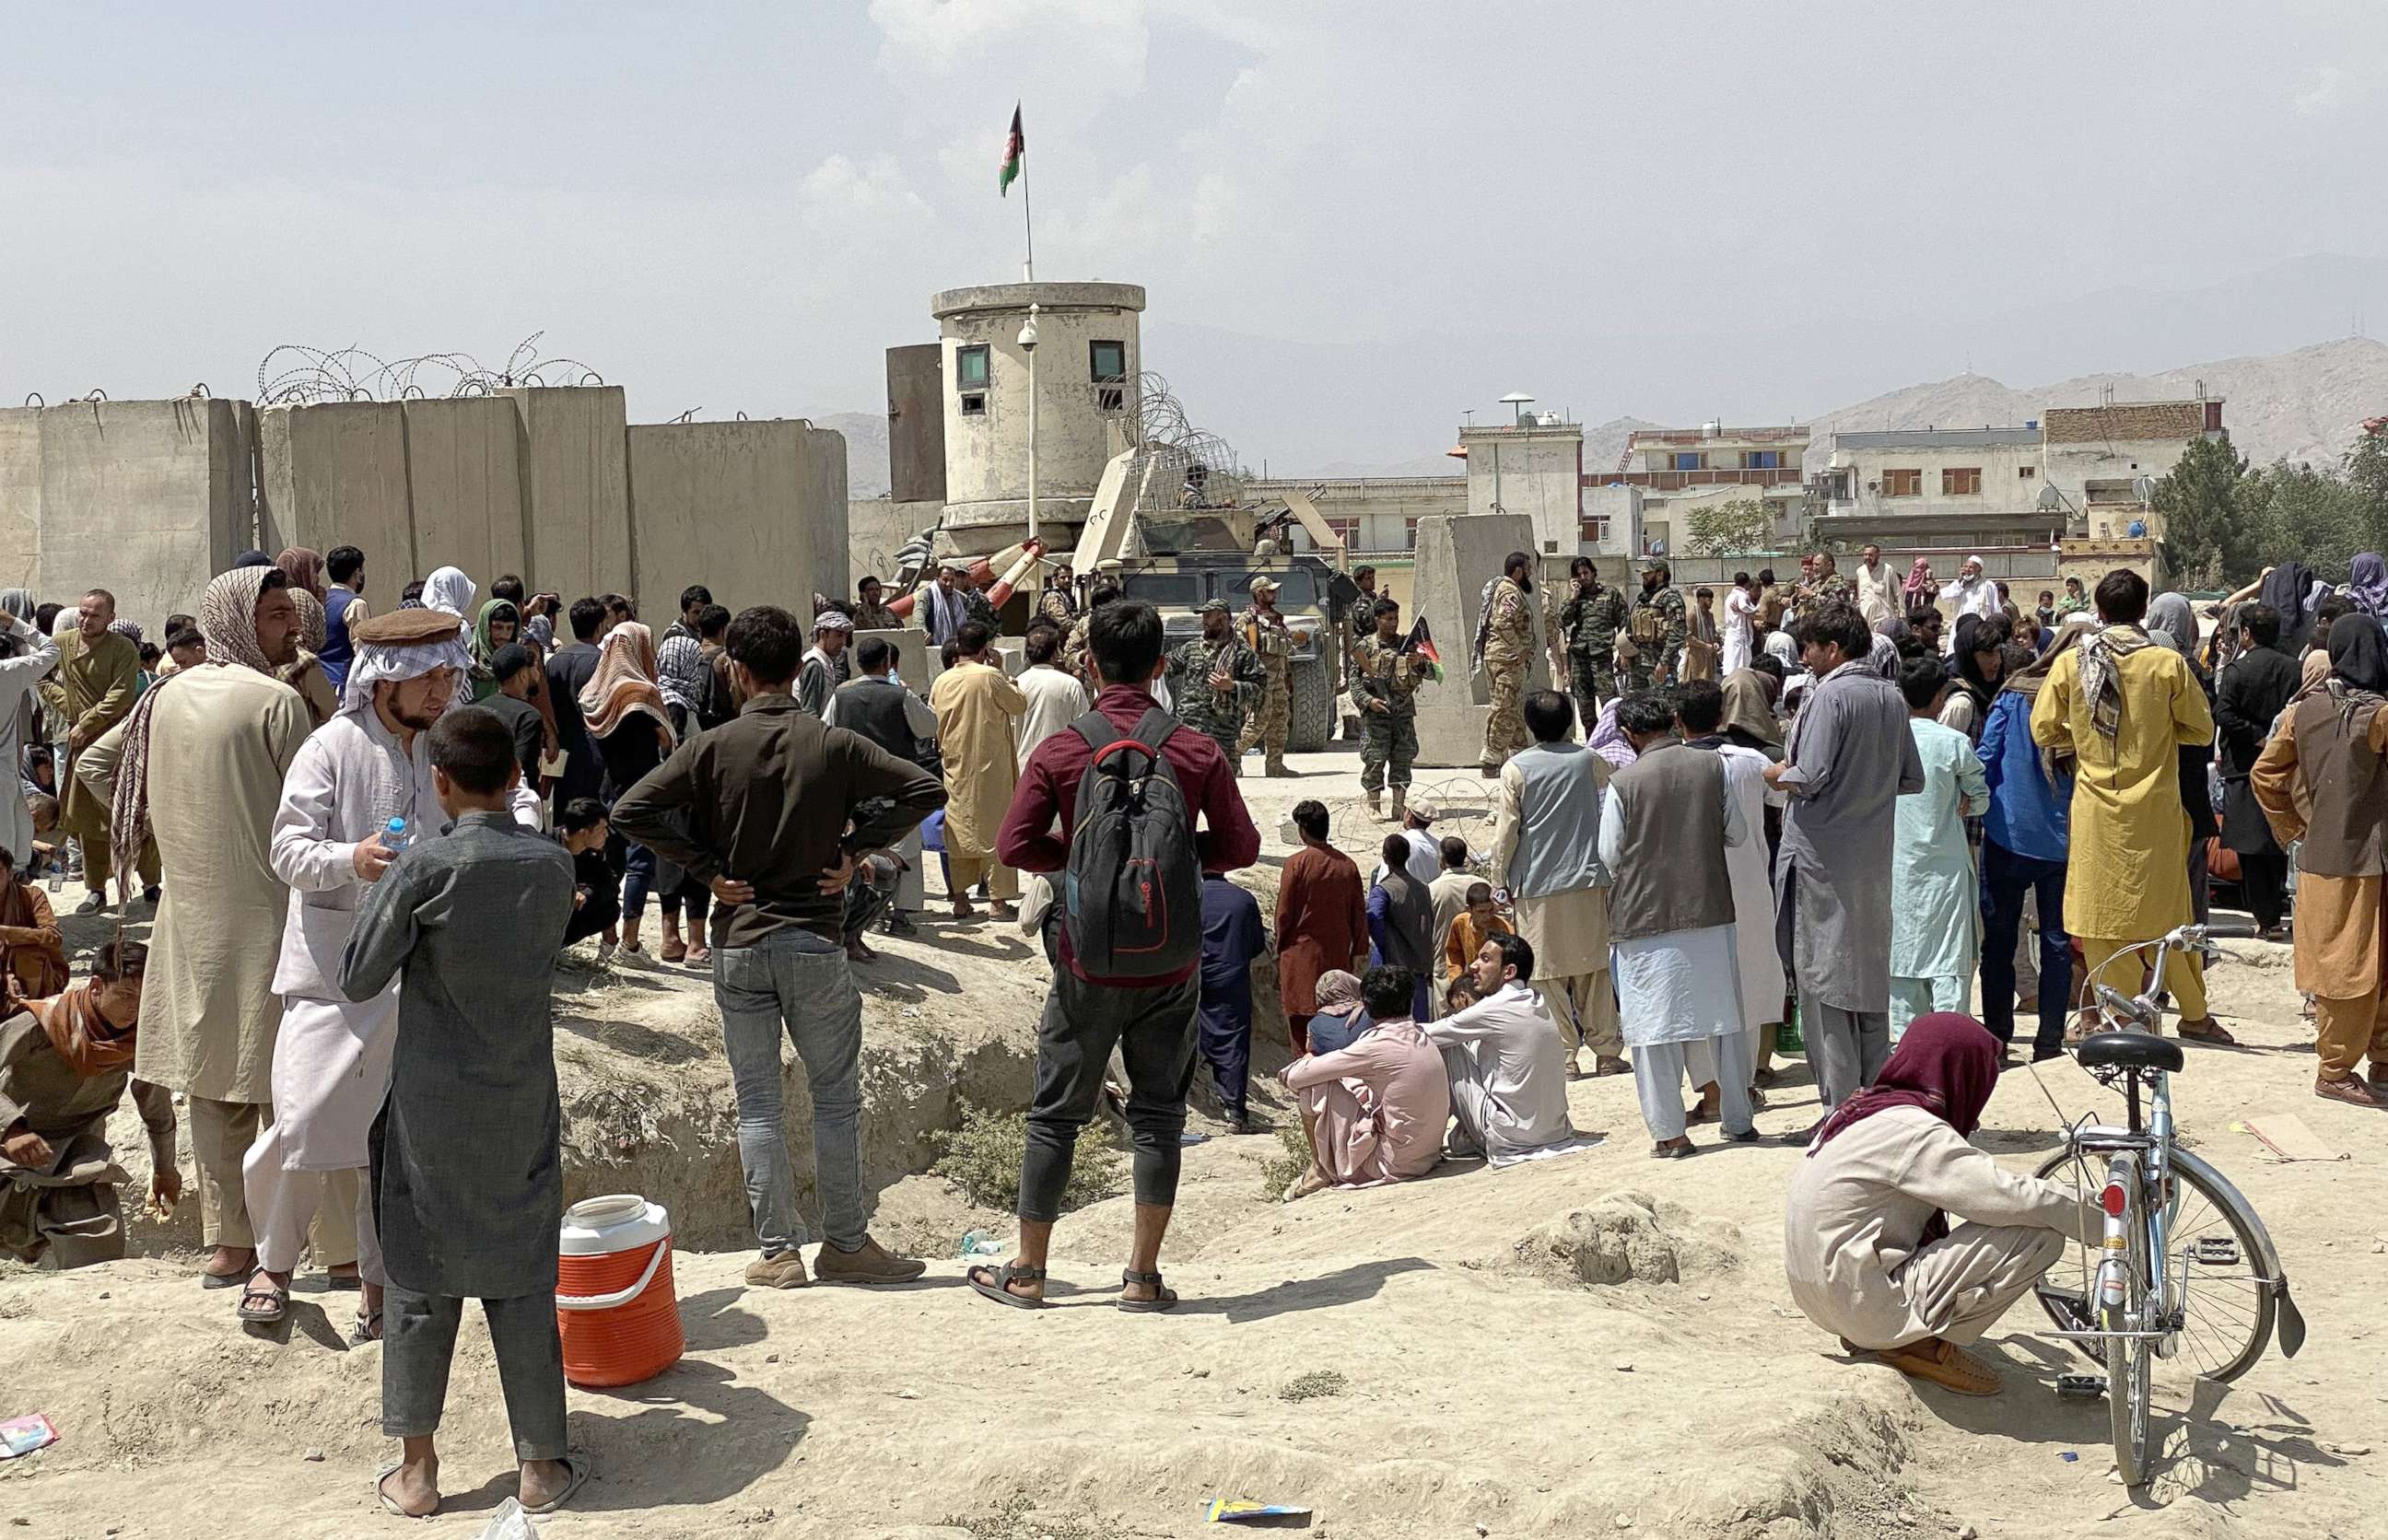 PHOTO: Afghans gather outside the Hamid Karzai International Airport to flee the country on 17 August 2021, after Taliban took control of Kabul.